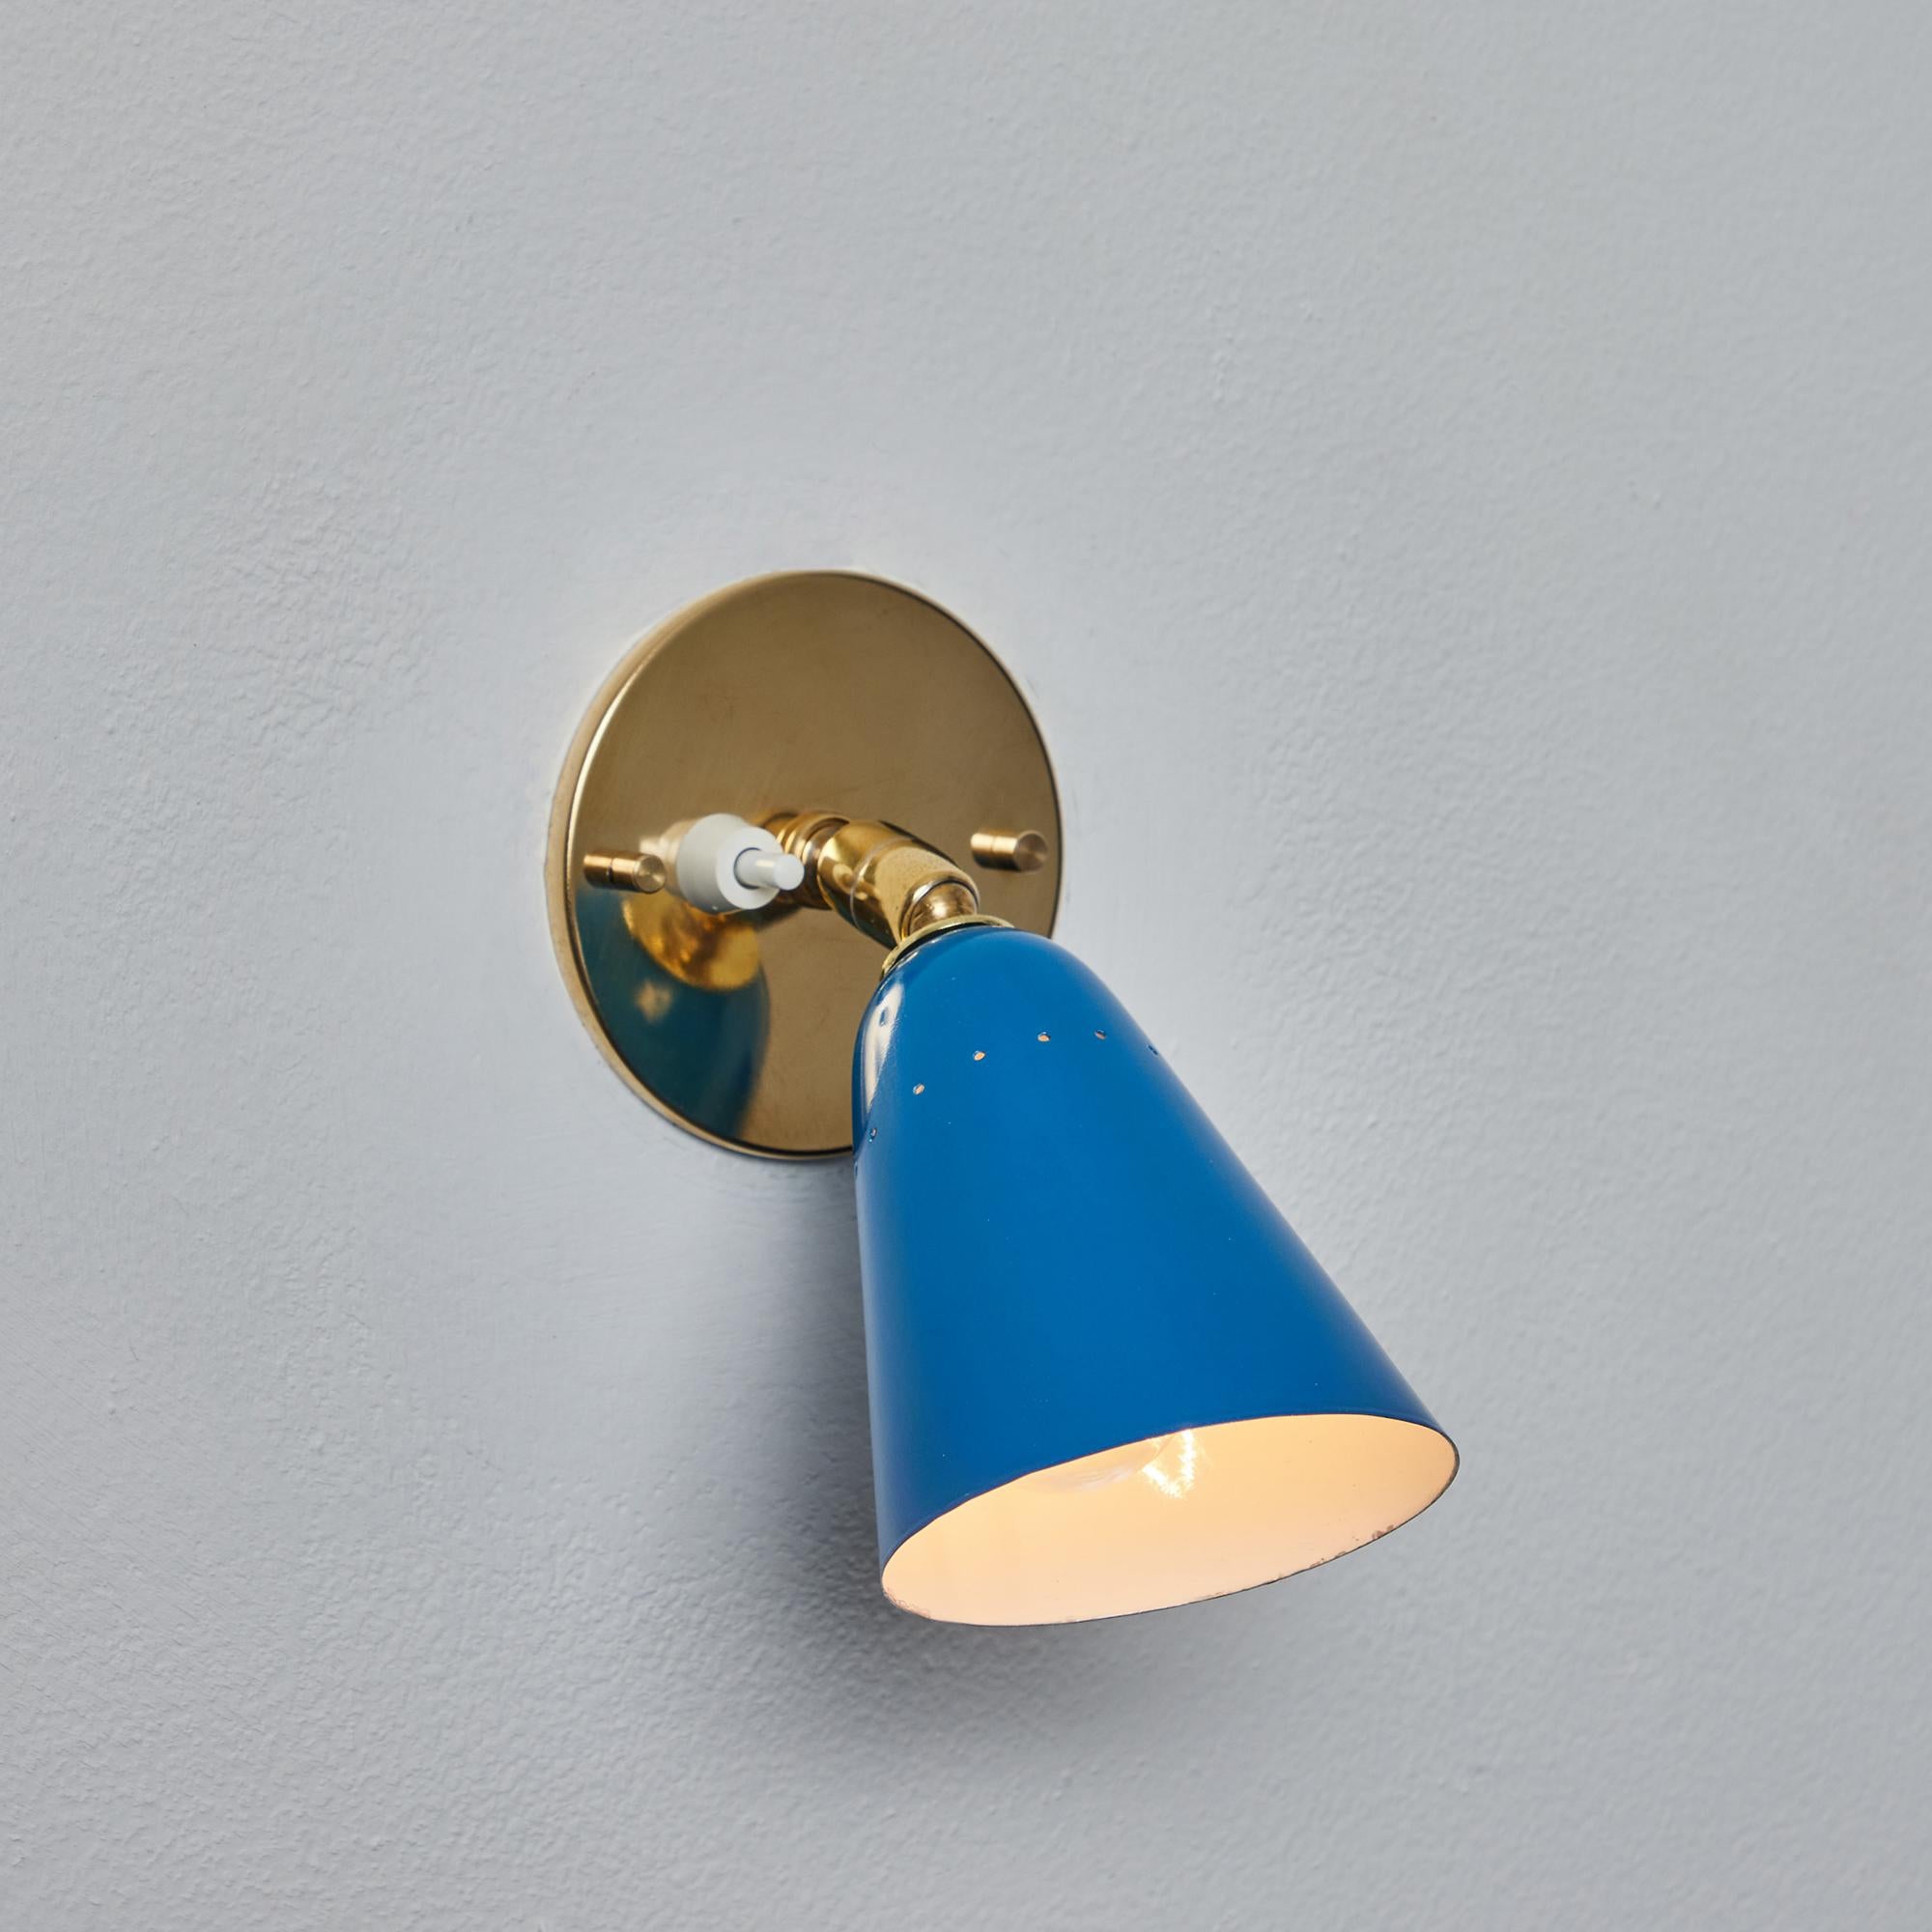 1960s Gino Sarfatti Model #26b Blue and Brass Wall Lamp for Arteluce For Sale 4